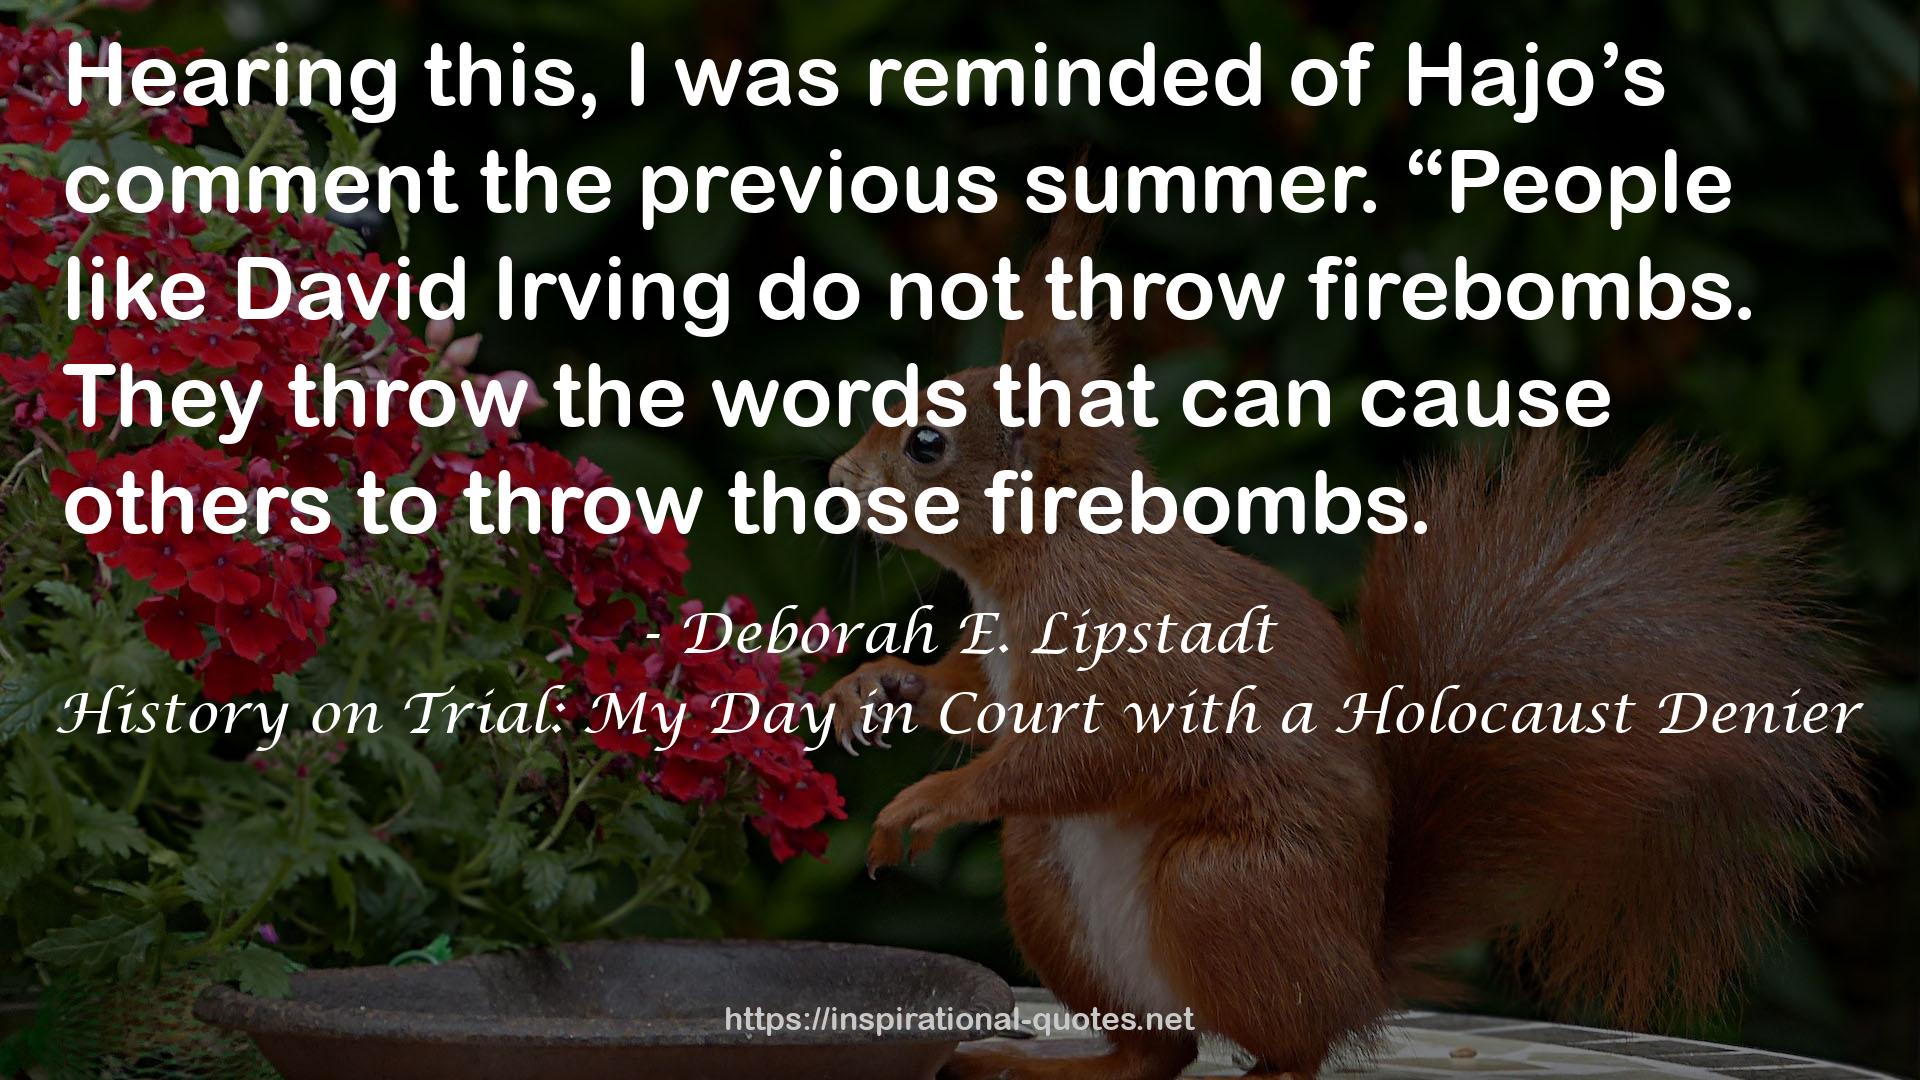 History on Trial: My Day in Court with a Holocaust Denier QUOTES